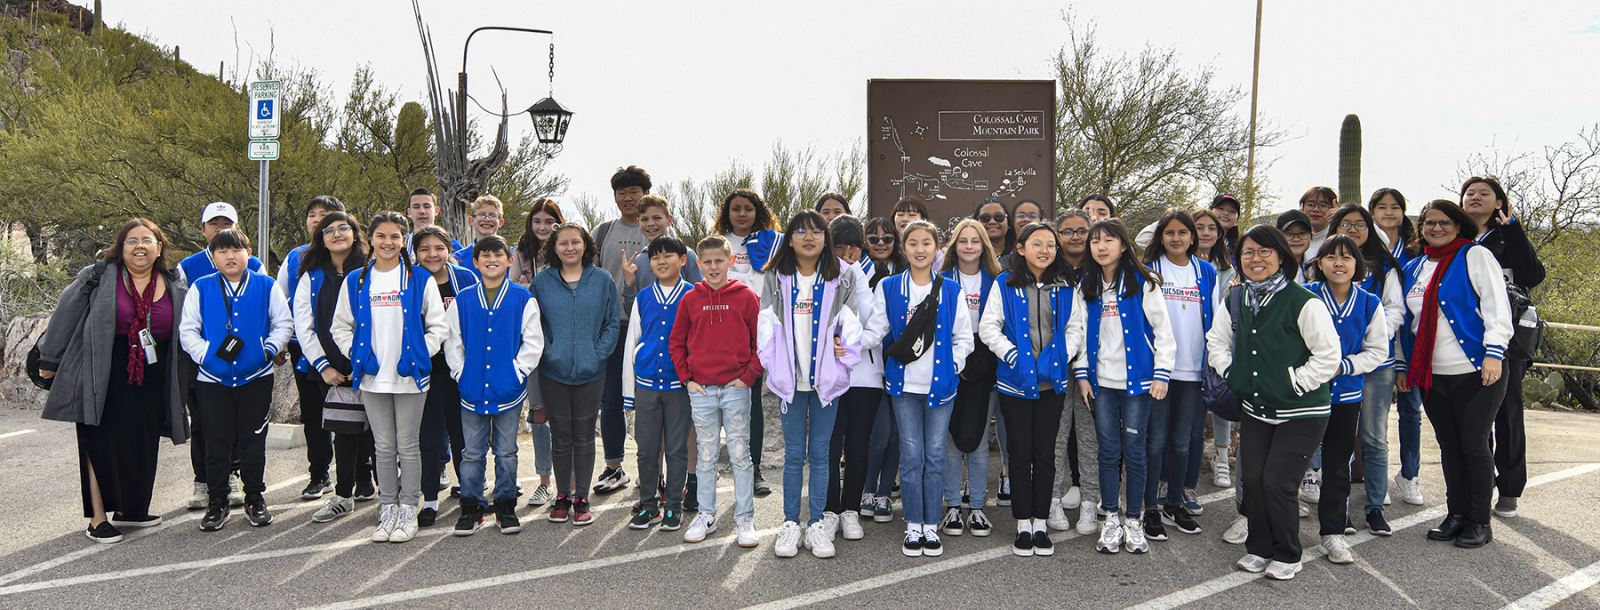 Korean Students At Colossal Cave Sign